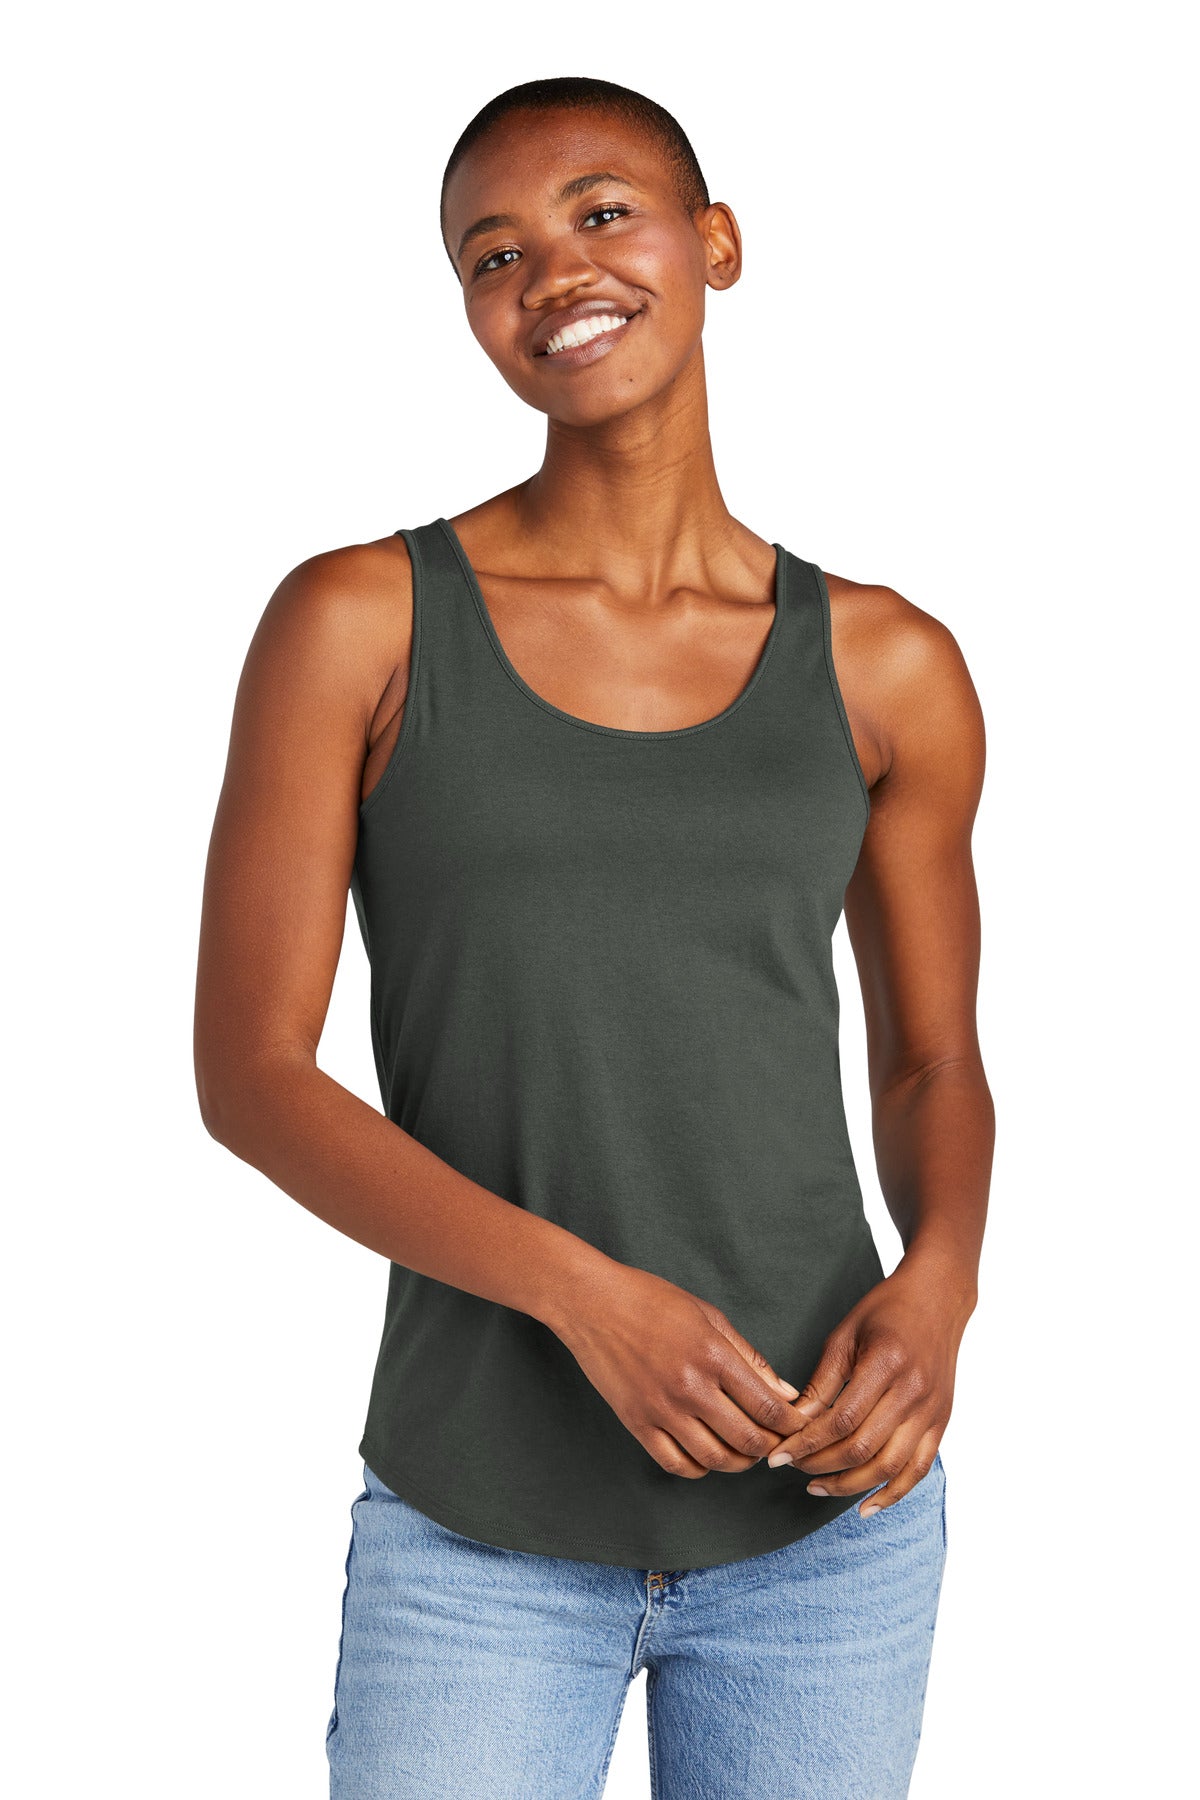 District Women's Perfect Tri Relaxed Tank DT151